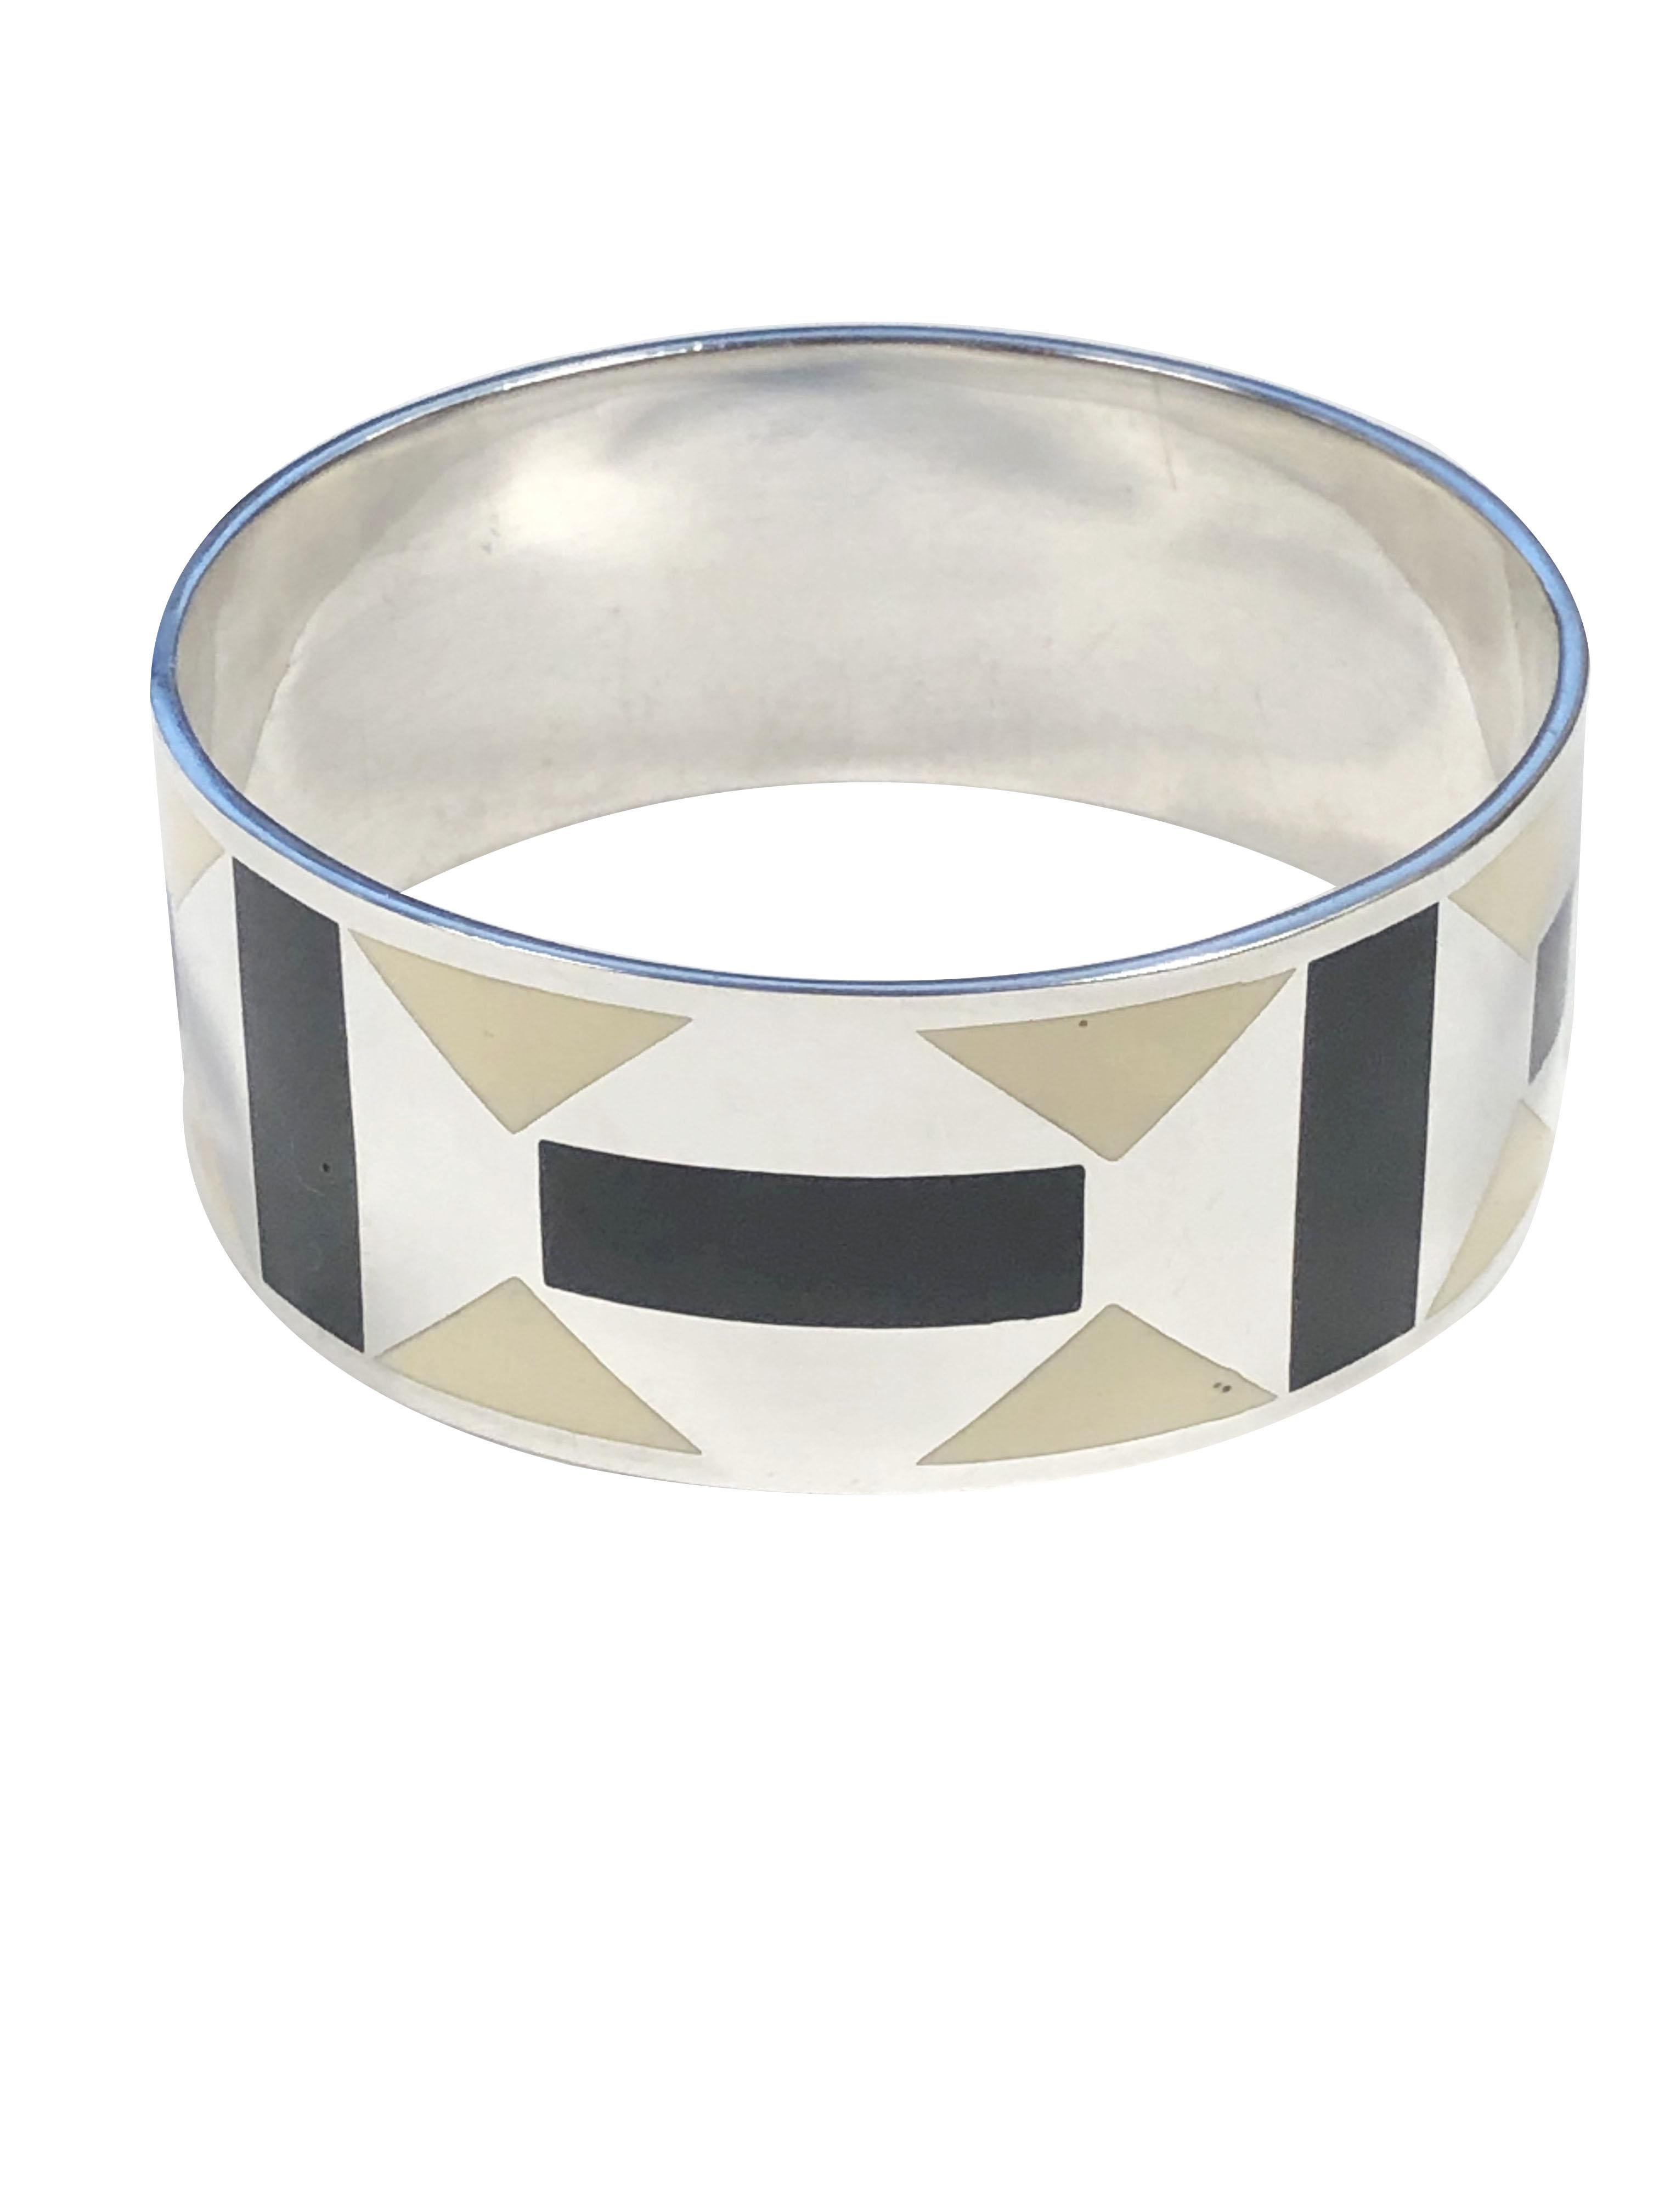 Circa 1990s Paloma Picasso for Tiffany & Company Zellige collection Sterling Silver Bangle Bracelet, measuring just over 1 inch wide and having an alternating Art Deco style pattern in Ivory and Black Enamel. Inside measurement 7 1/2 inches. Comes